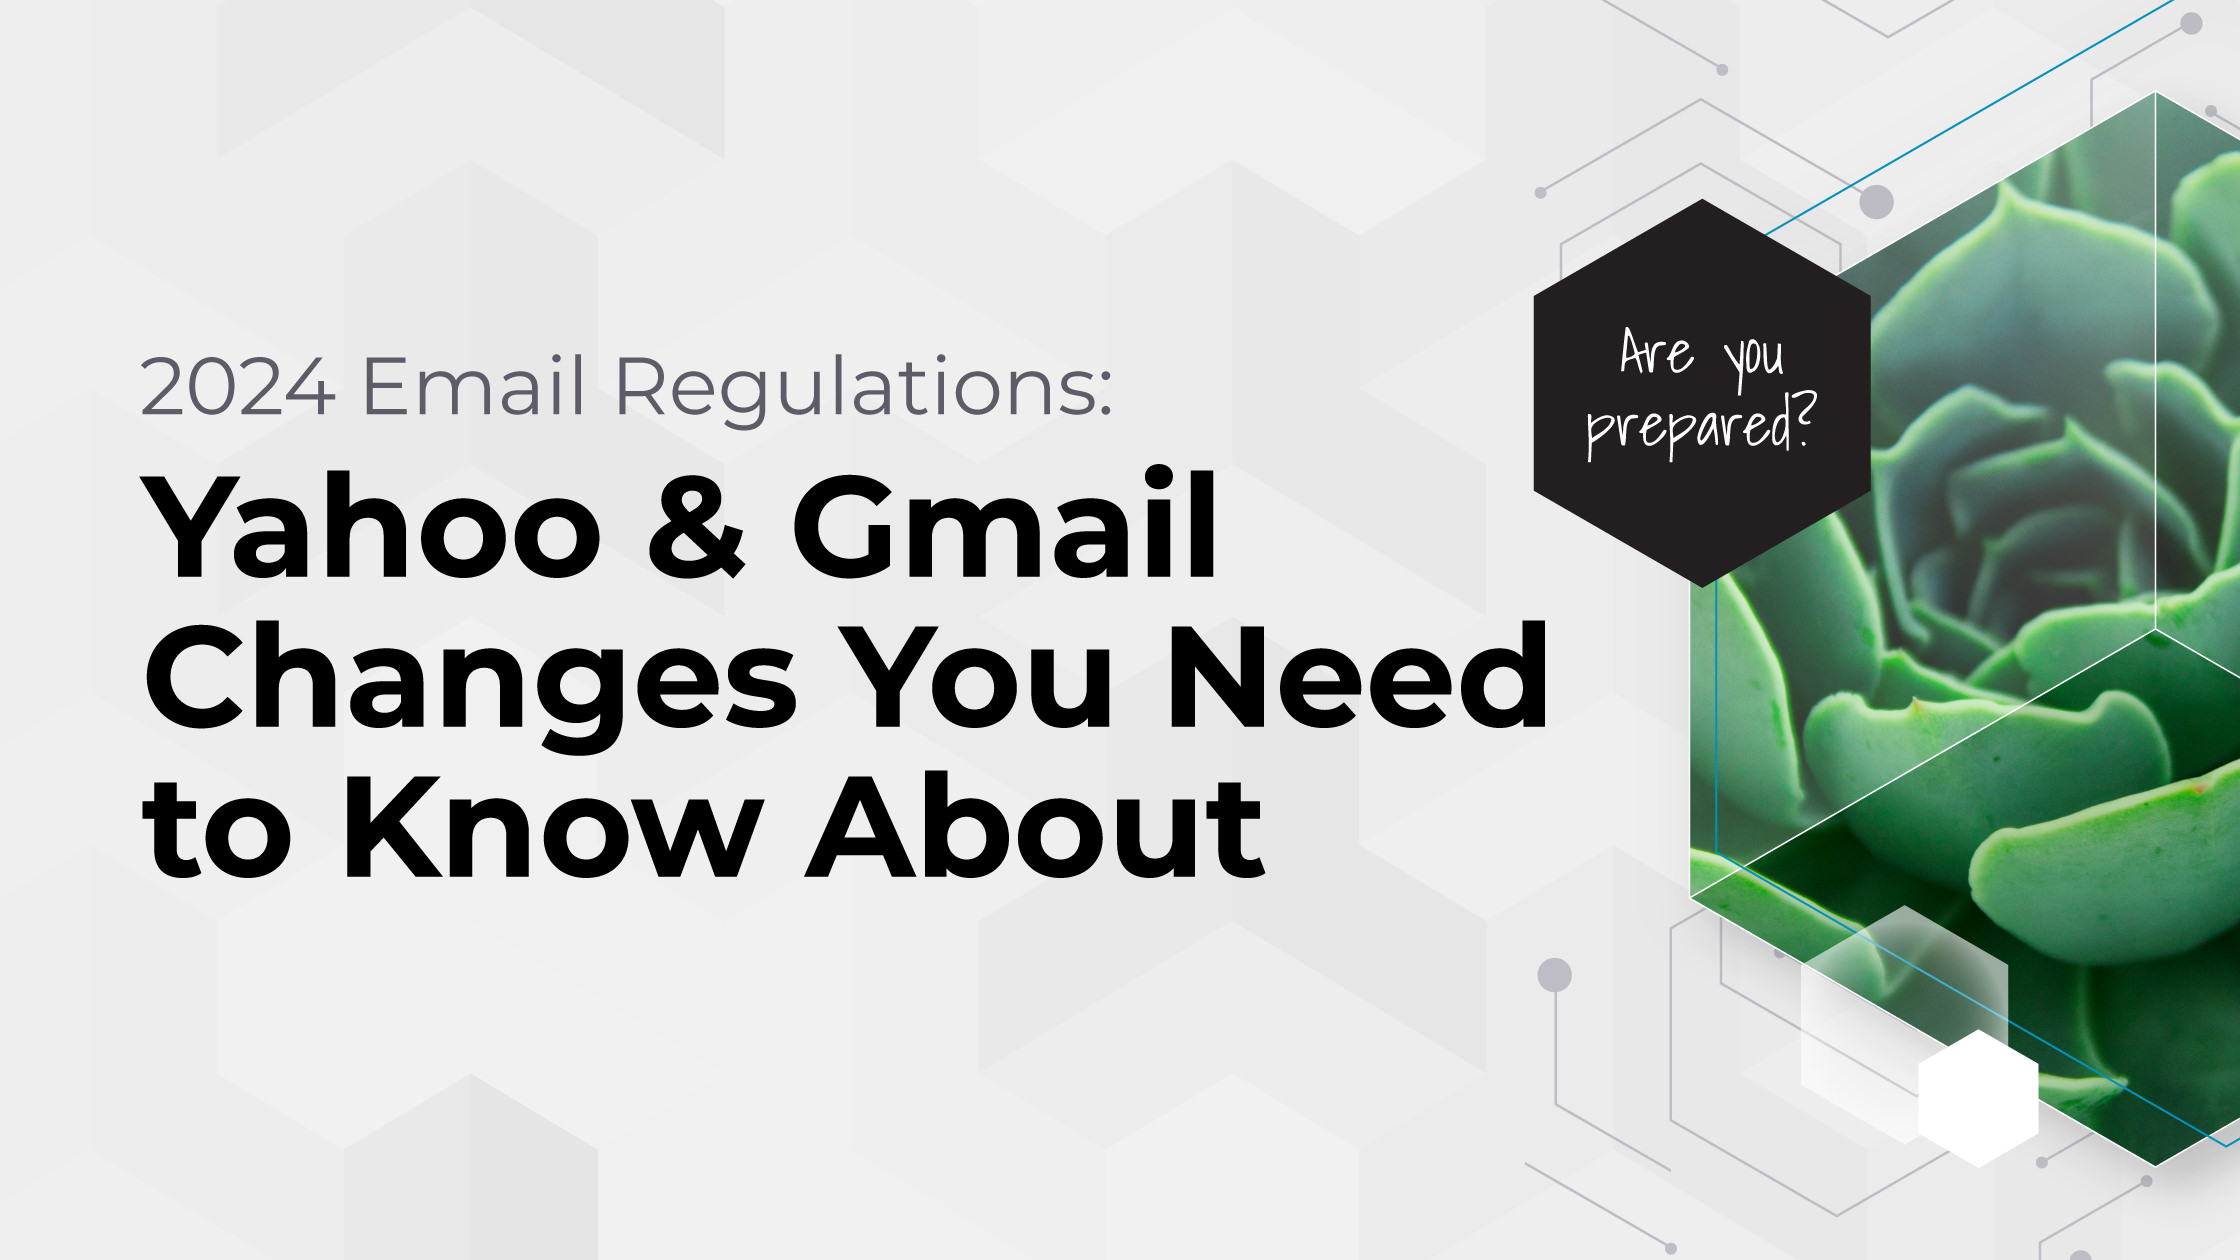 2024 Email Regulations: Yahoo & Gmail Changes You Need to Know About